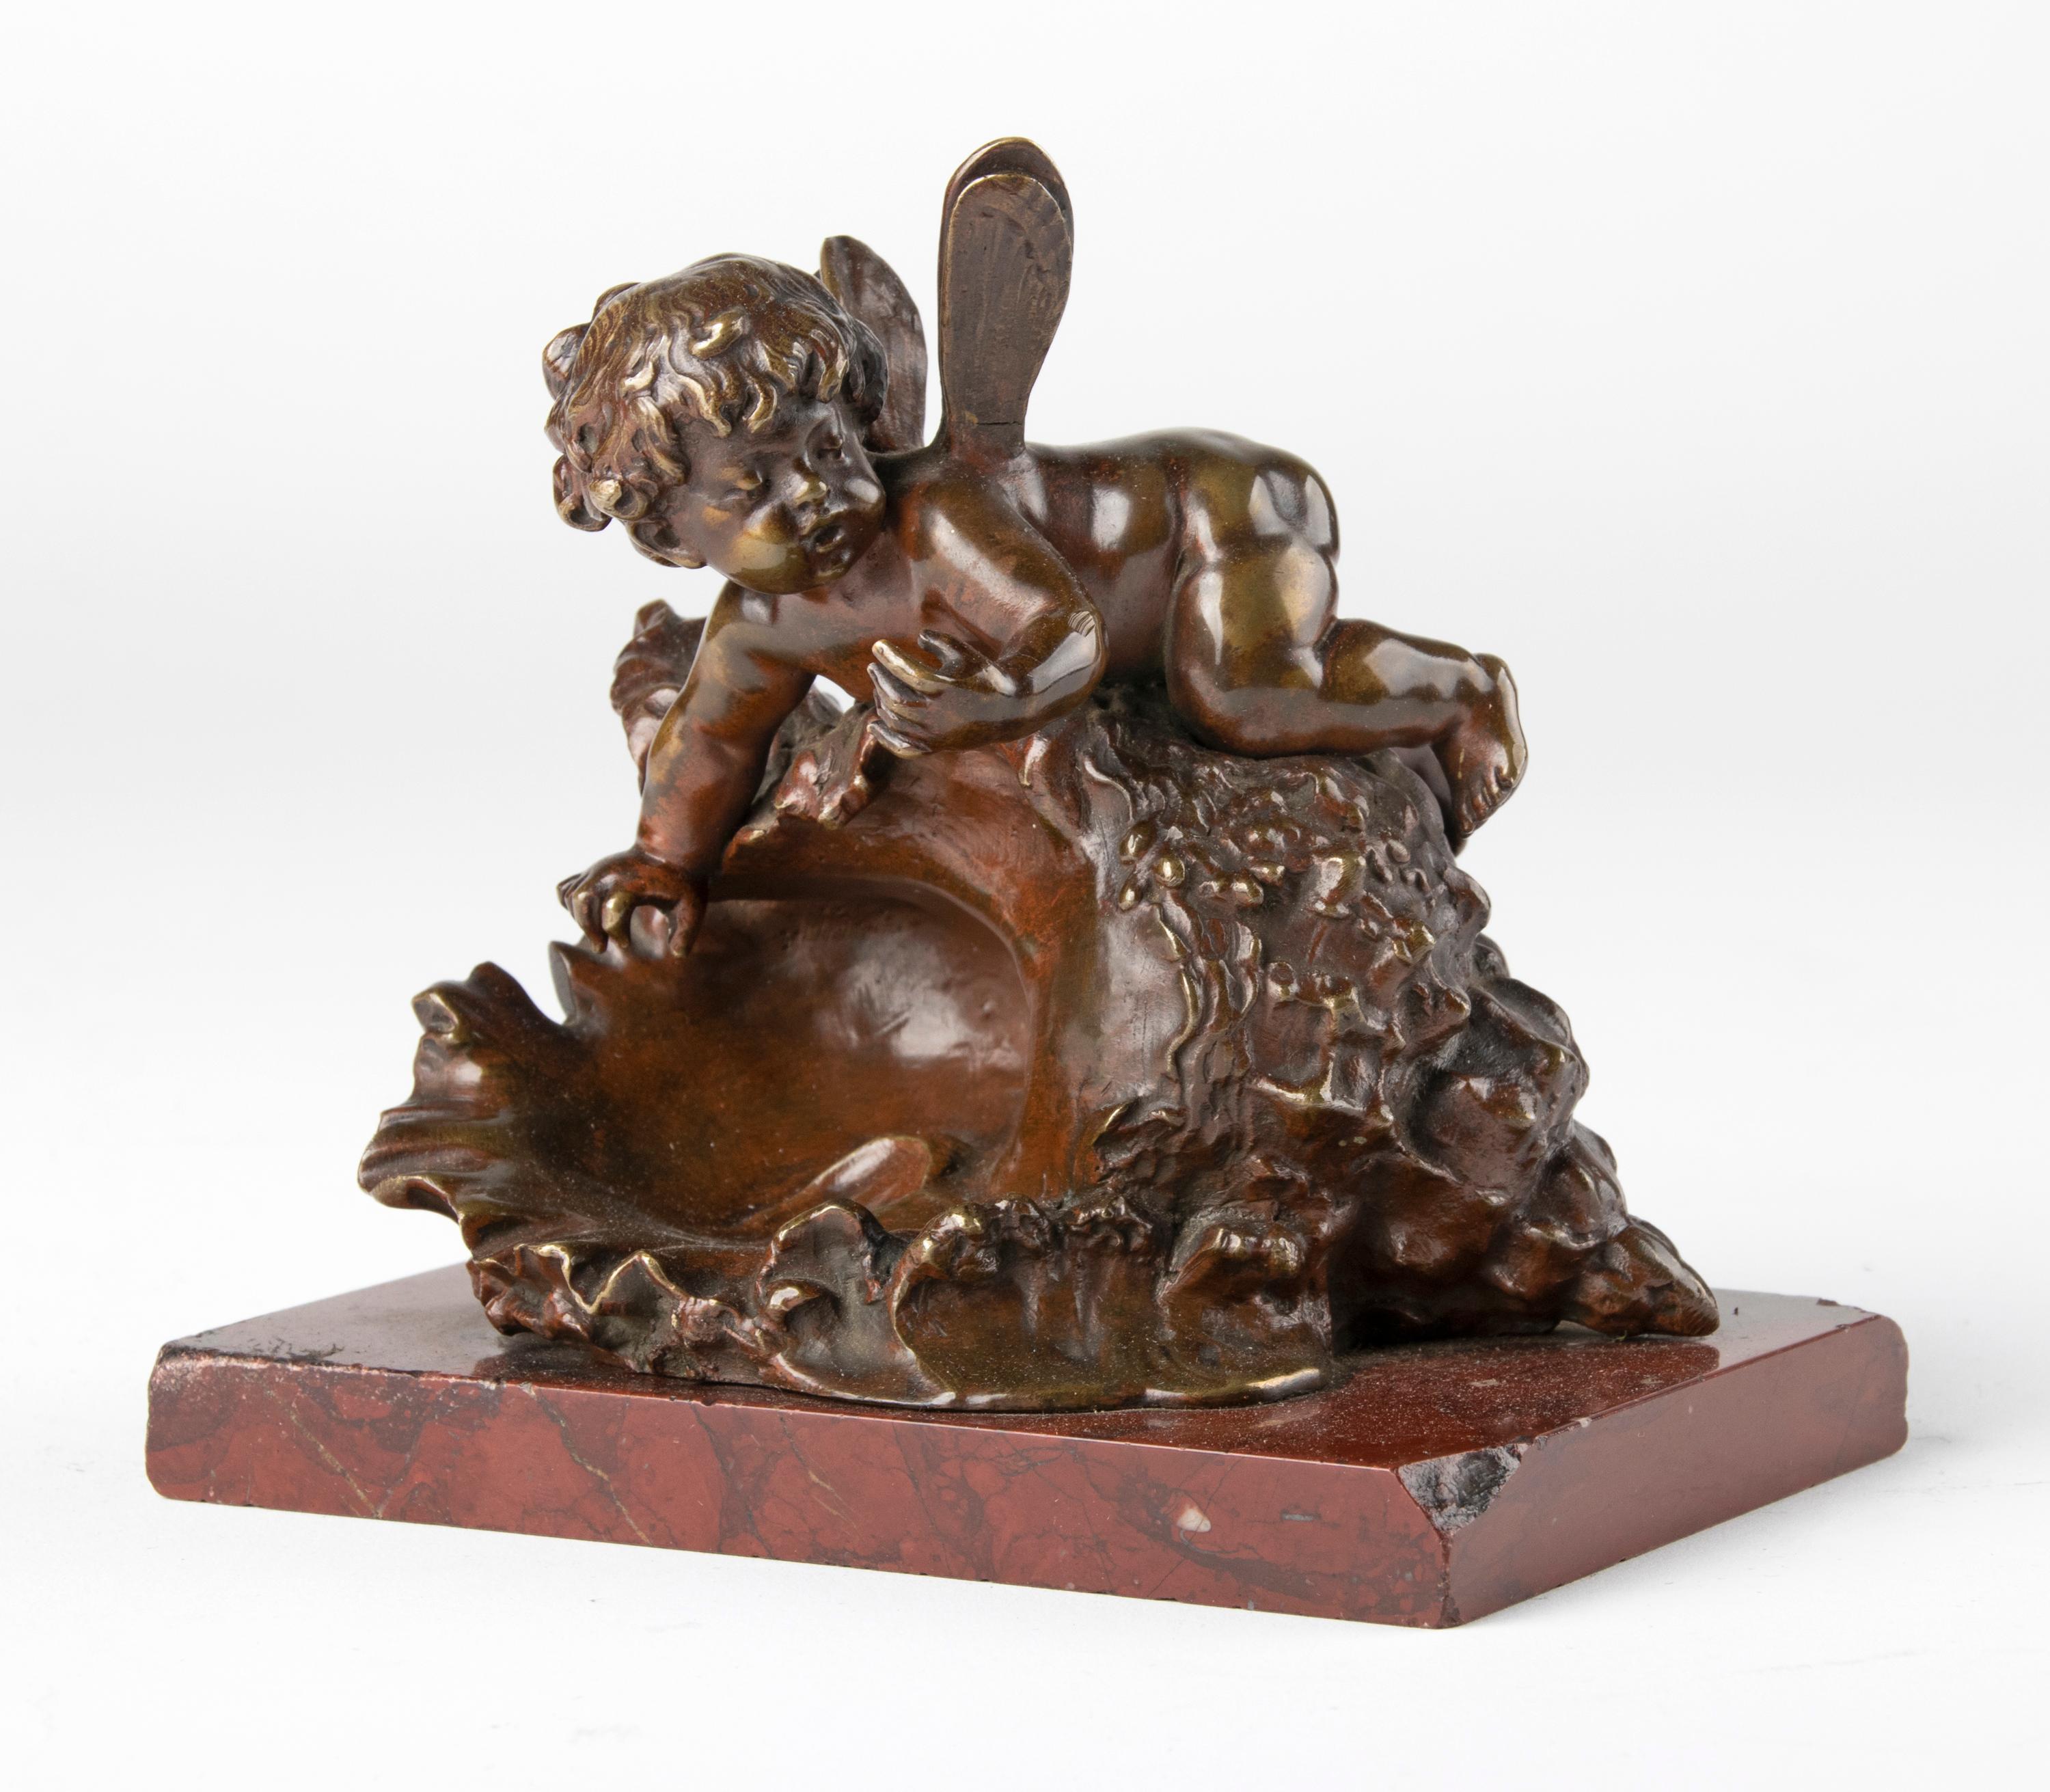 Cute little bronze statue by the famous French sculptor Auguste Moreau. The figurine represents a small cherub sitting on a shell. The figurine is very detailed and beautifully refined. The bronze has a beautiful old patina and stands on a simple